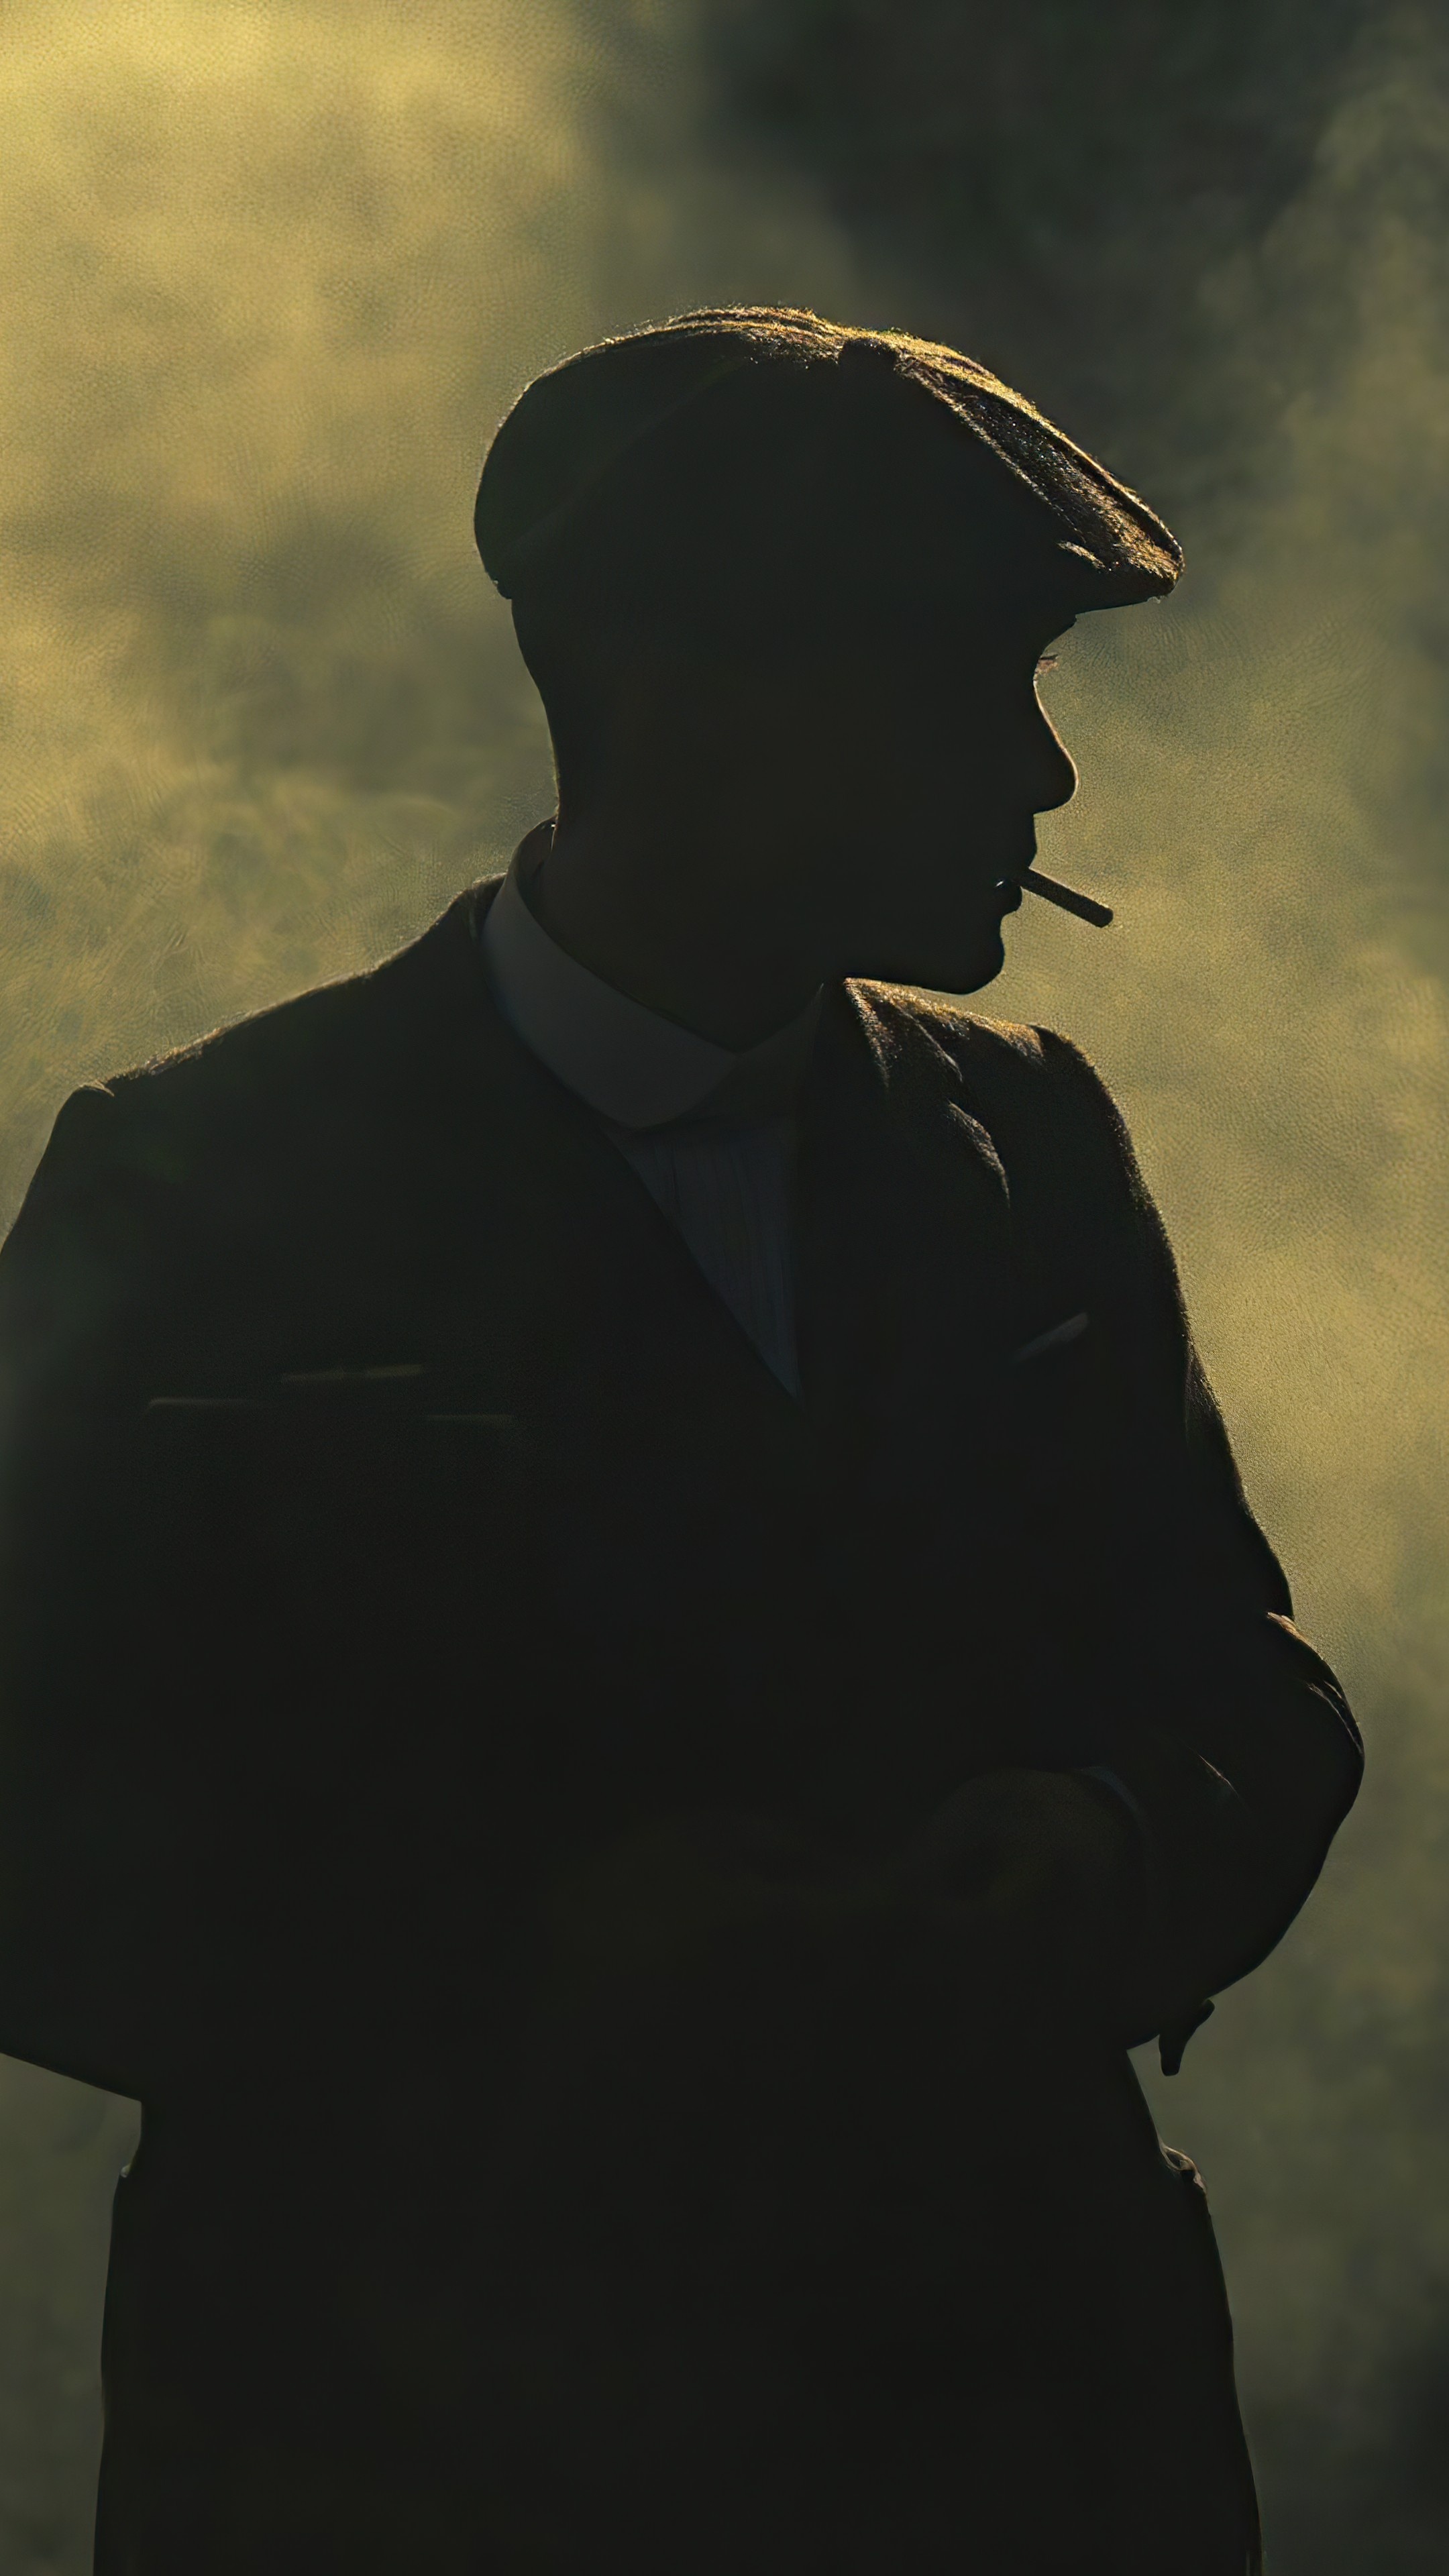 Wallpaper weapons, the series, gang, BBC, Peaky blinders, Peaky Blinders,  TV Show, Thomas Shelby for mobile and desktop, section фильмы, resolution  2400x1600 - download